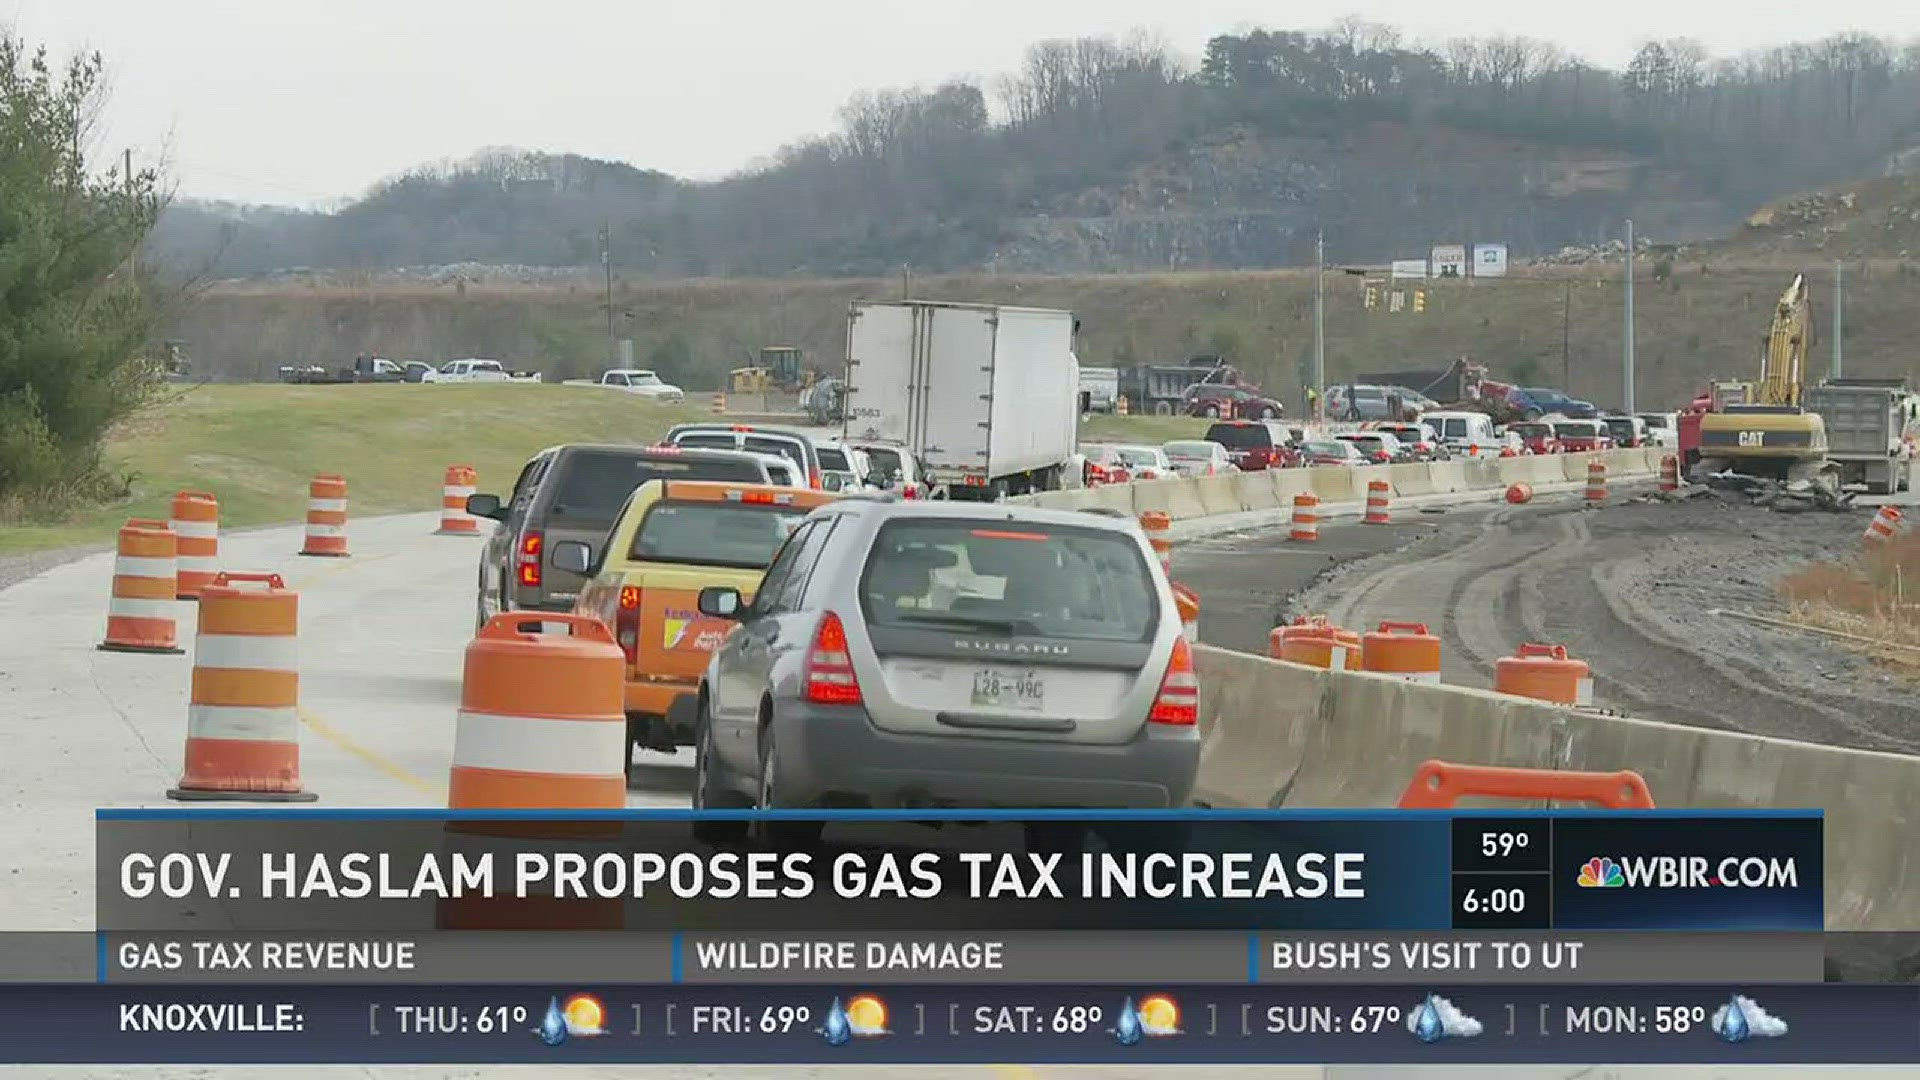 Jan. 18, 2017: Gov. Haslam is proposing to increase the state's gas tax by 7 cents a gallon to create additional road funding.